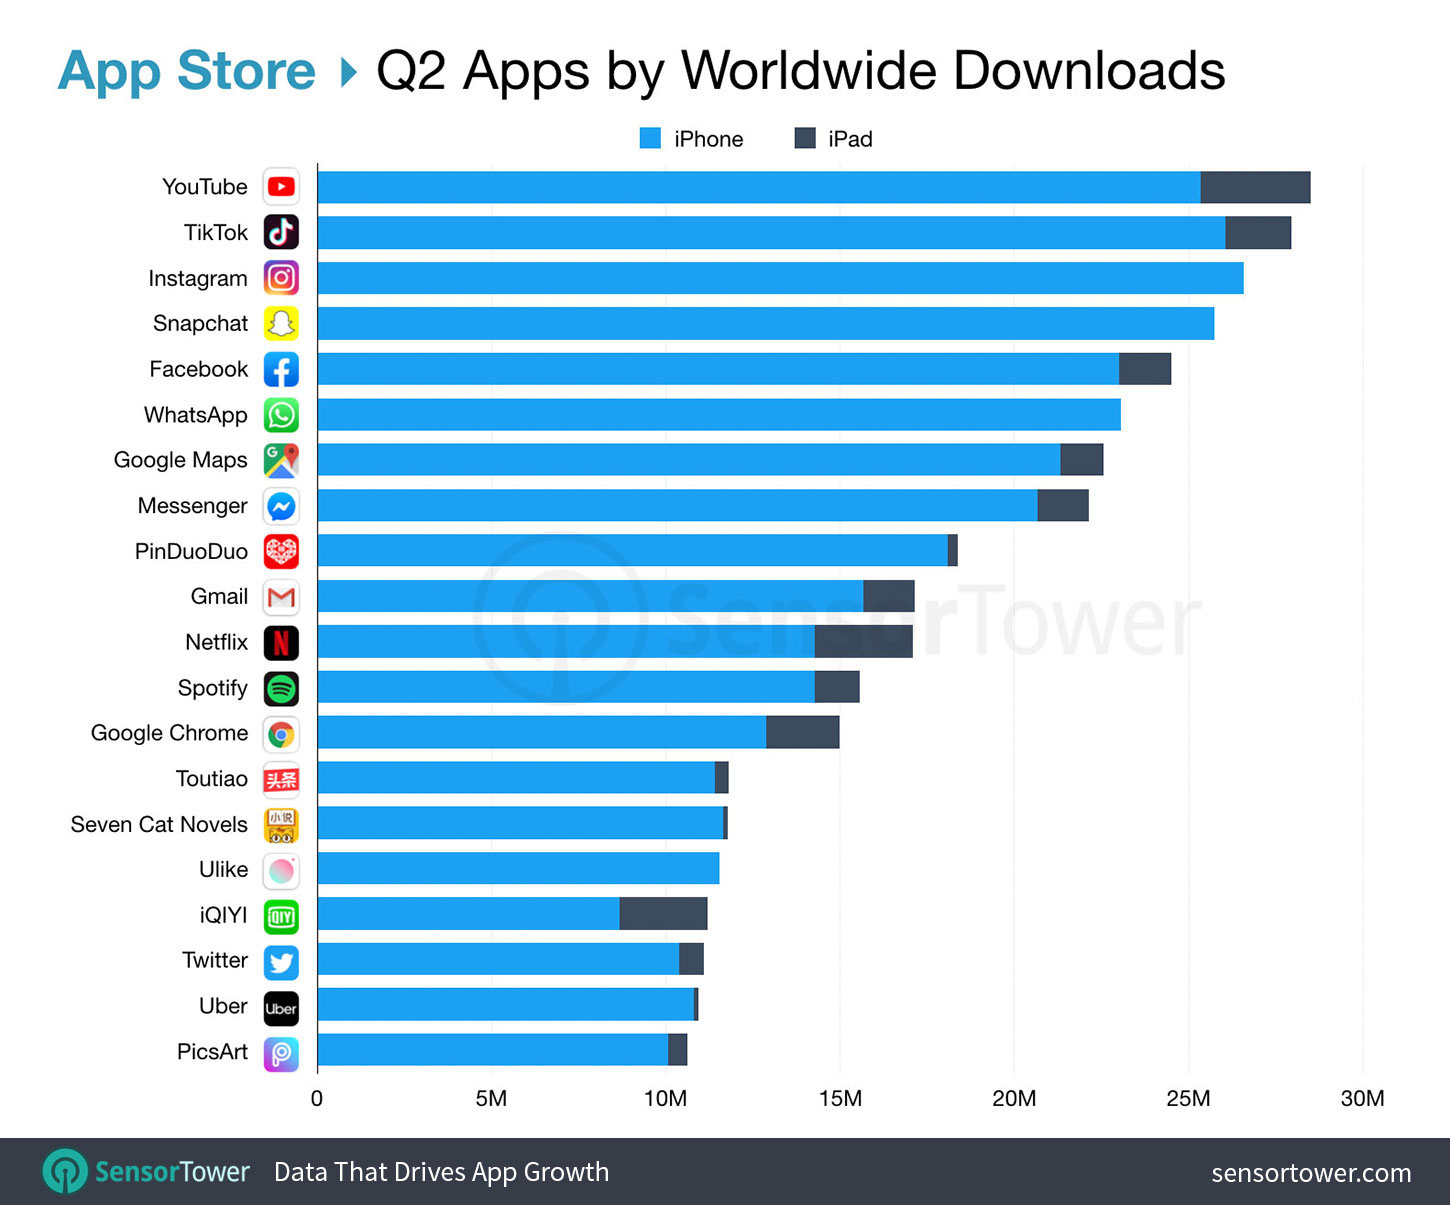 Top App Store Apps Worldwide for Q2 2019